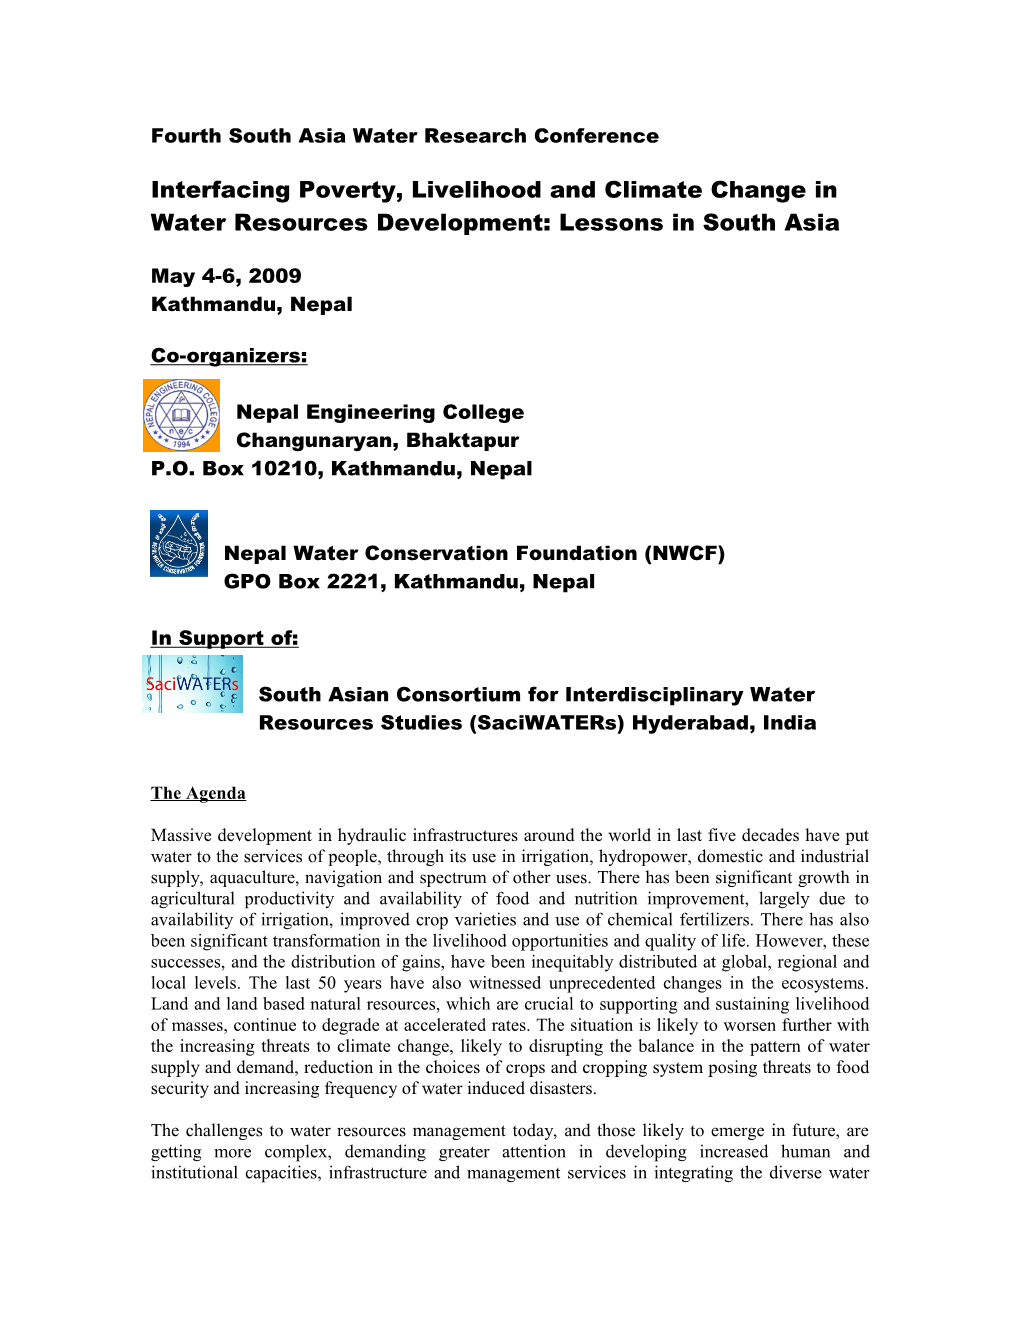 Interfacing Poverty, Livelihood and Climate Change in Water Resources Development: Are